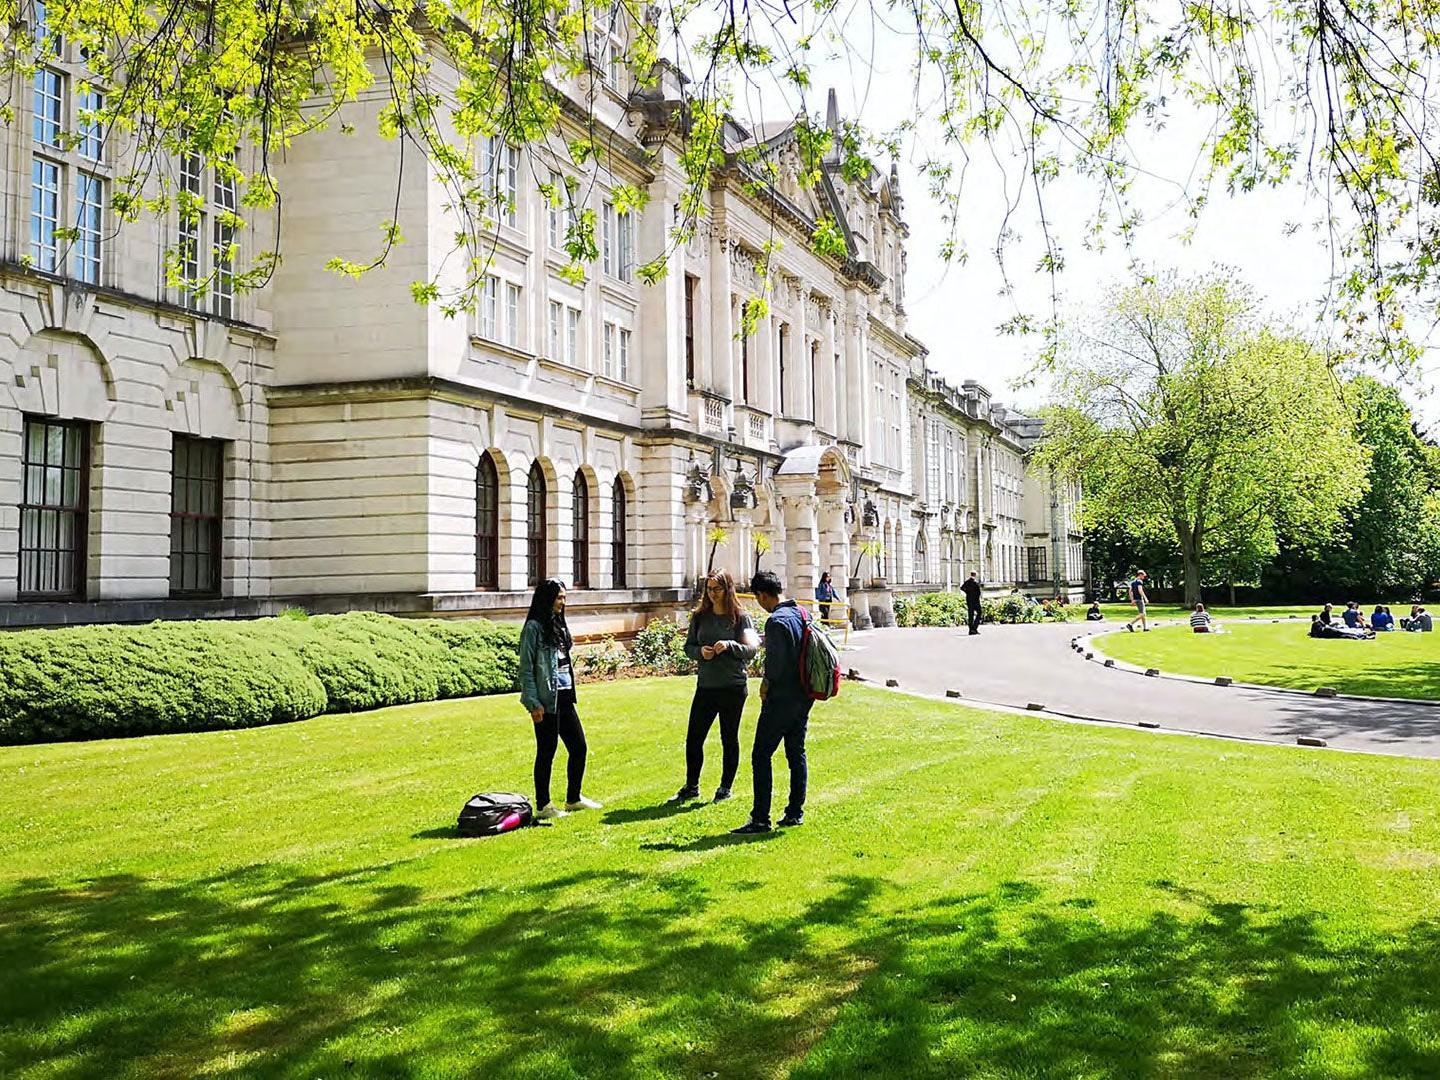 A group of student's stood outside Cardiff University Main Building, with grass, trees and other students in the background